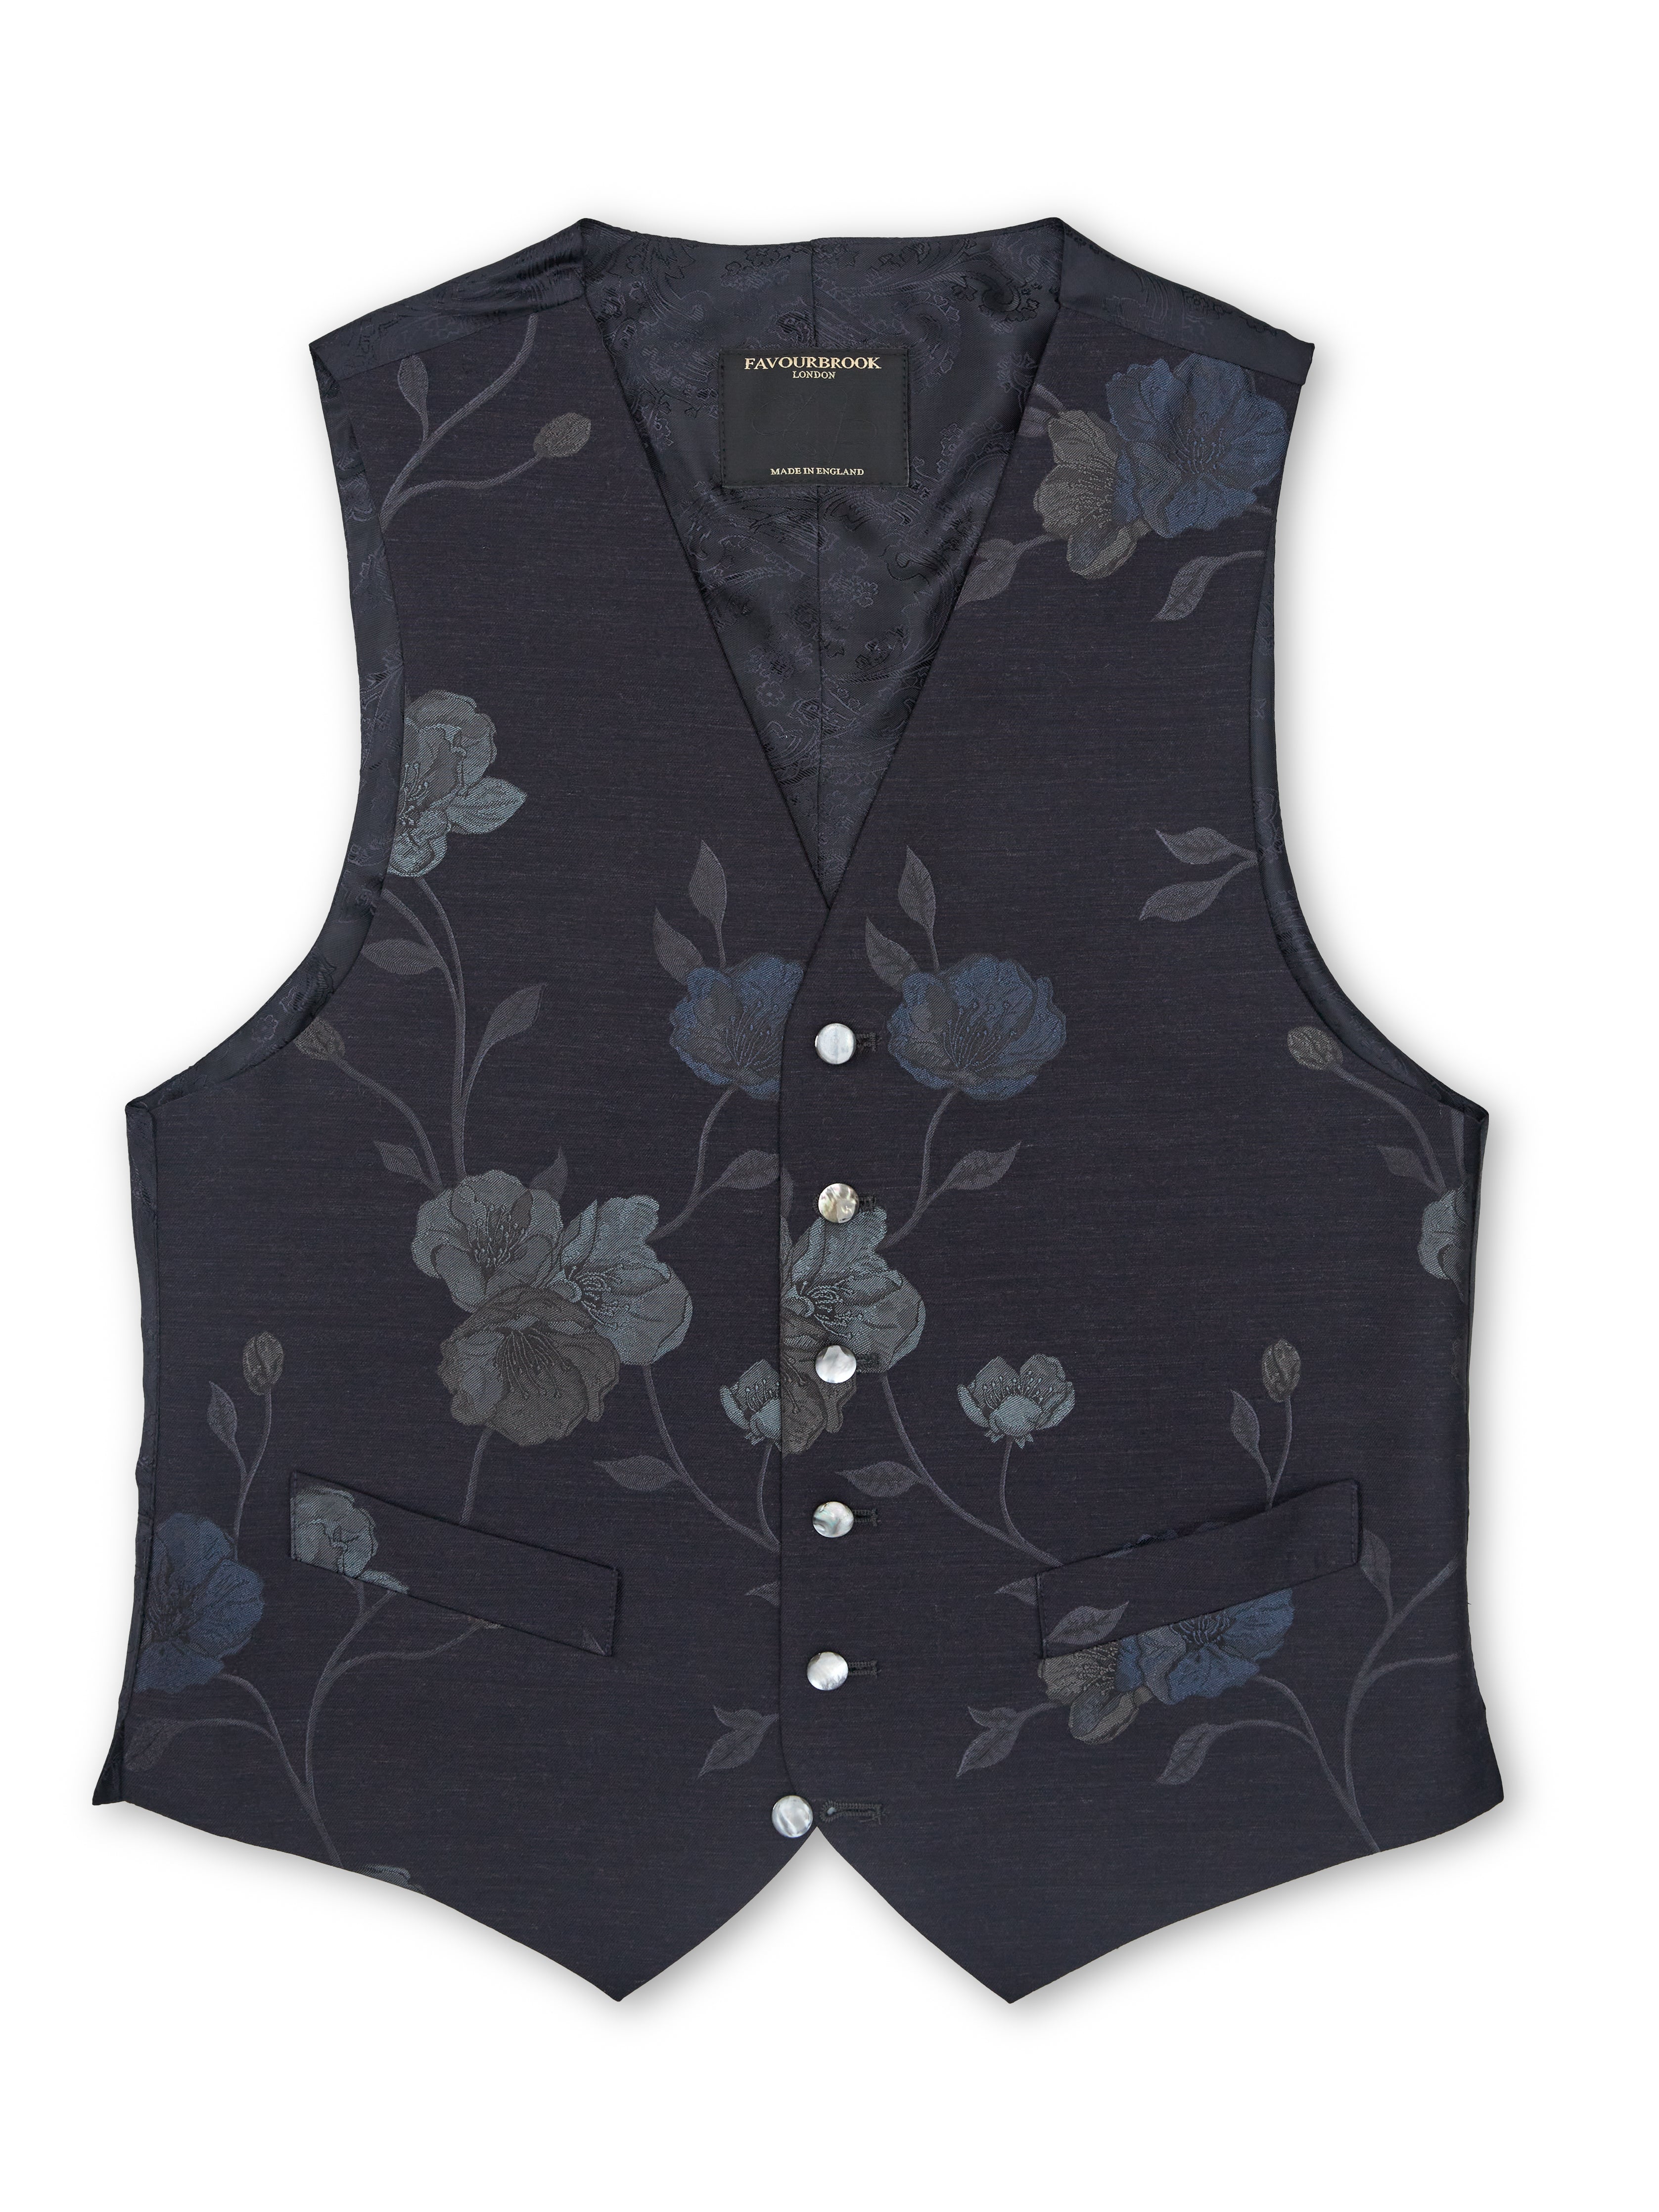 Midnight Grantham Single Breasted 6 Button Waistcoat